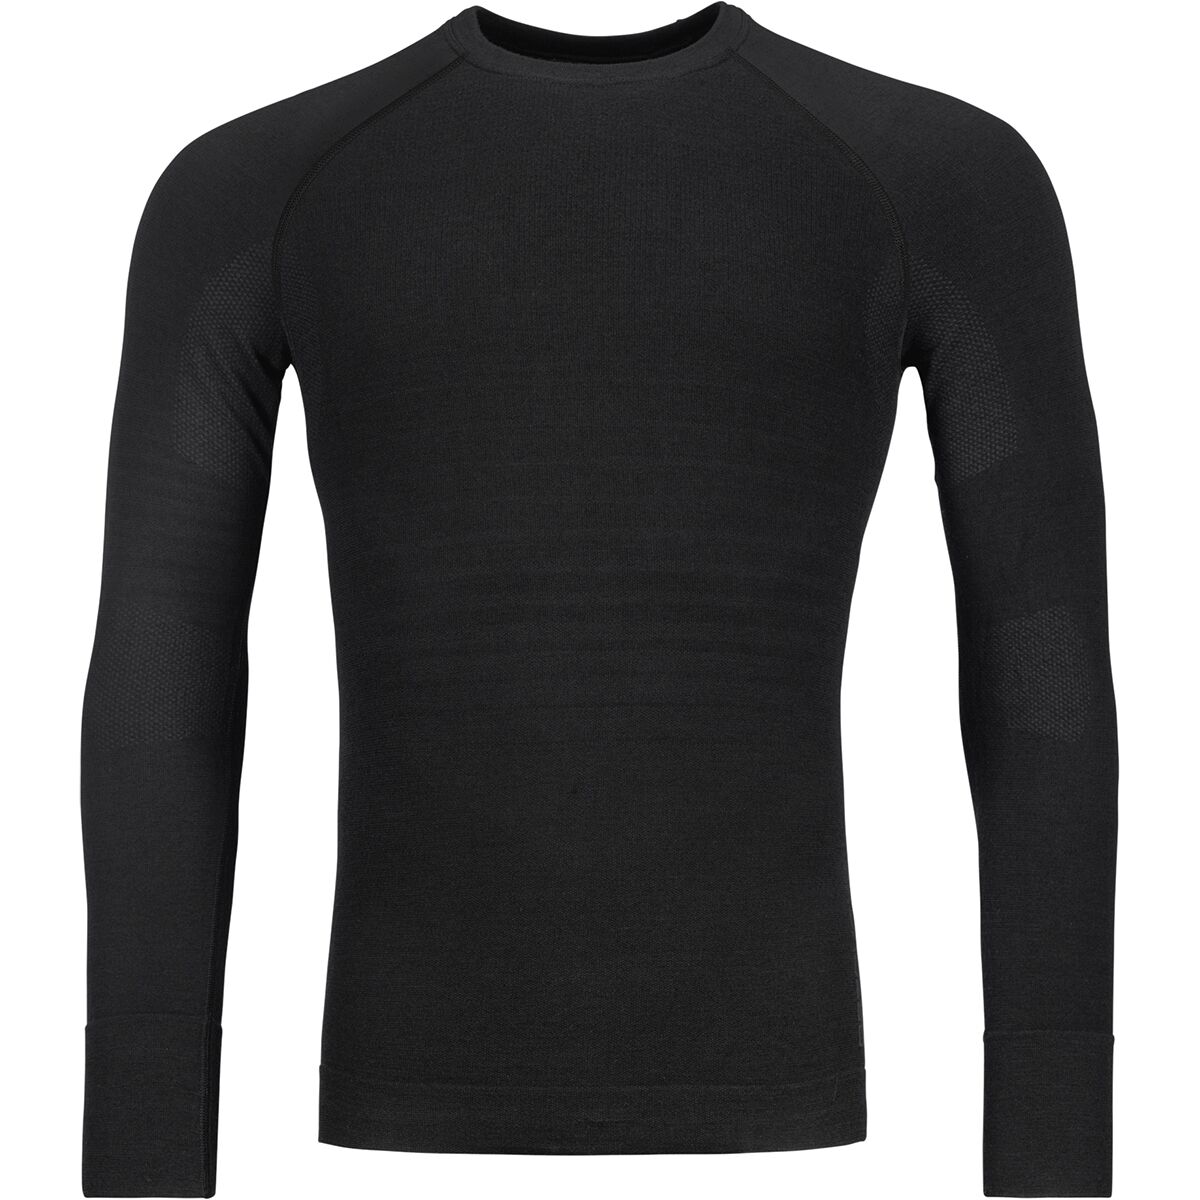 Ortovox 230 Competition Long-Sleeve Top - Men's